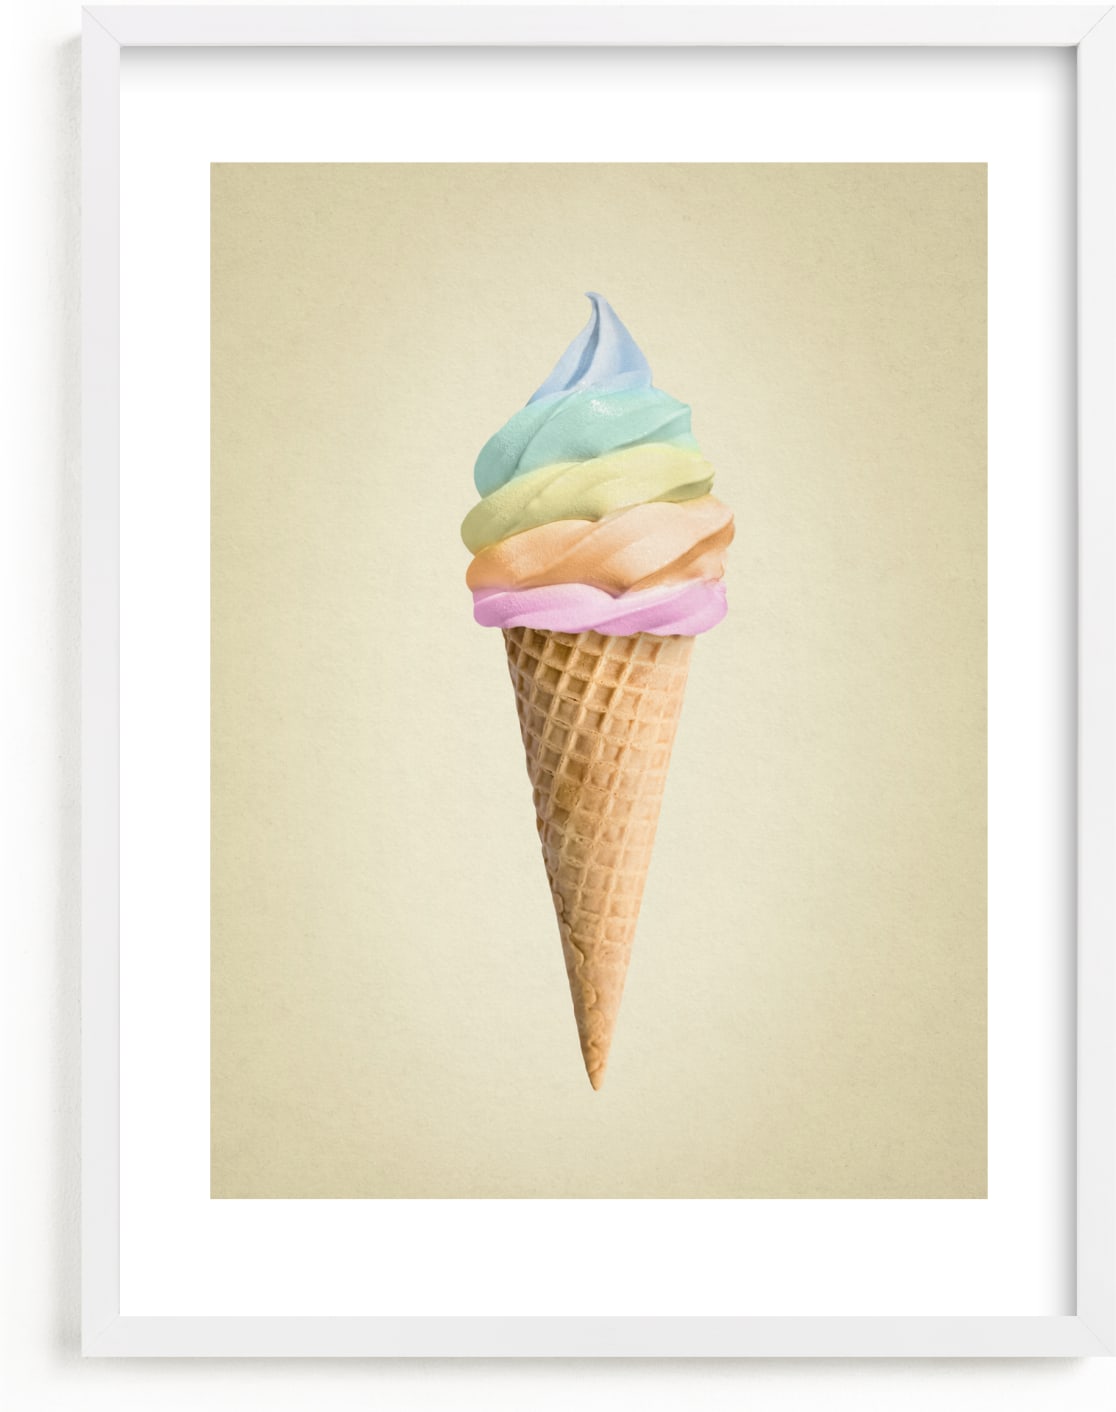 This is a beige art by Paola Benenati called Rainbow Ice Cream.